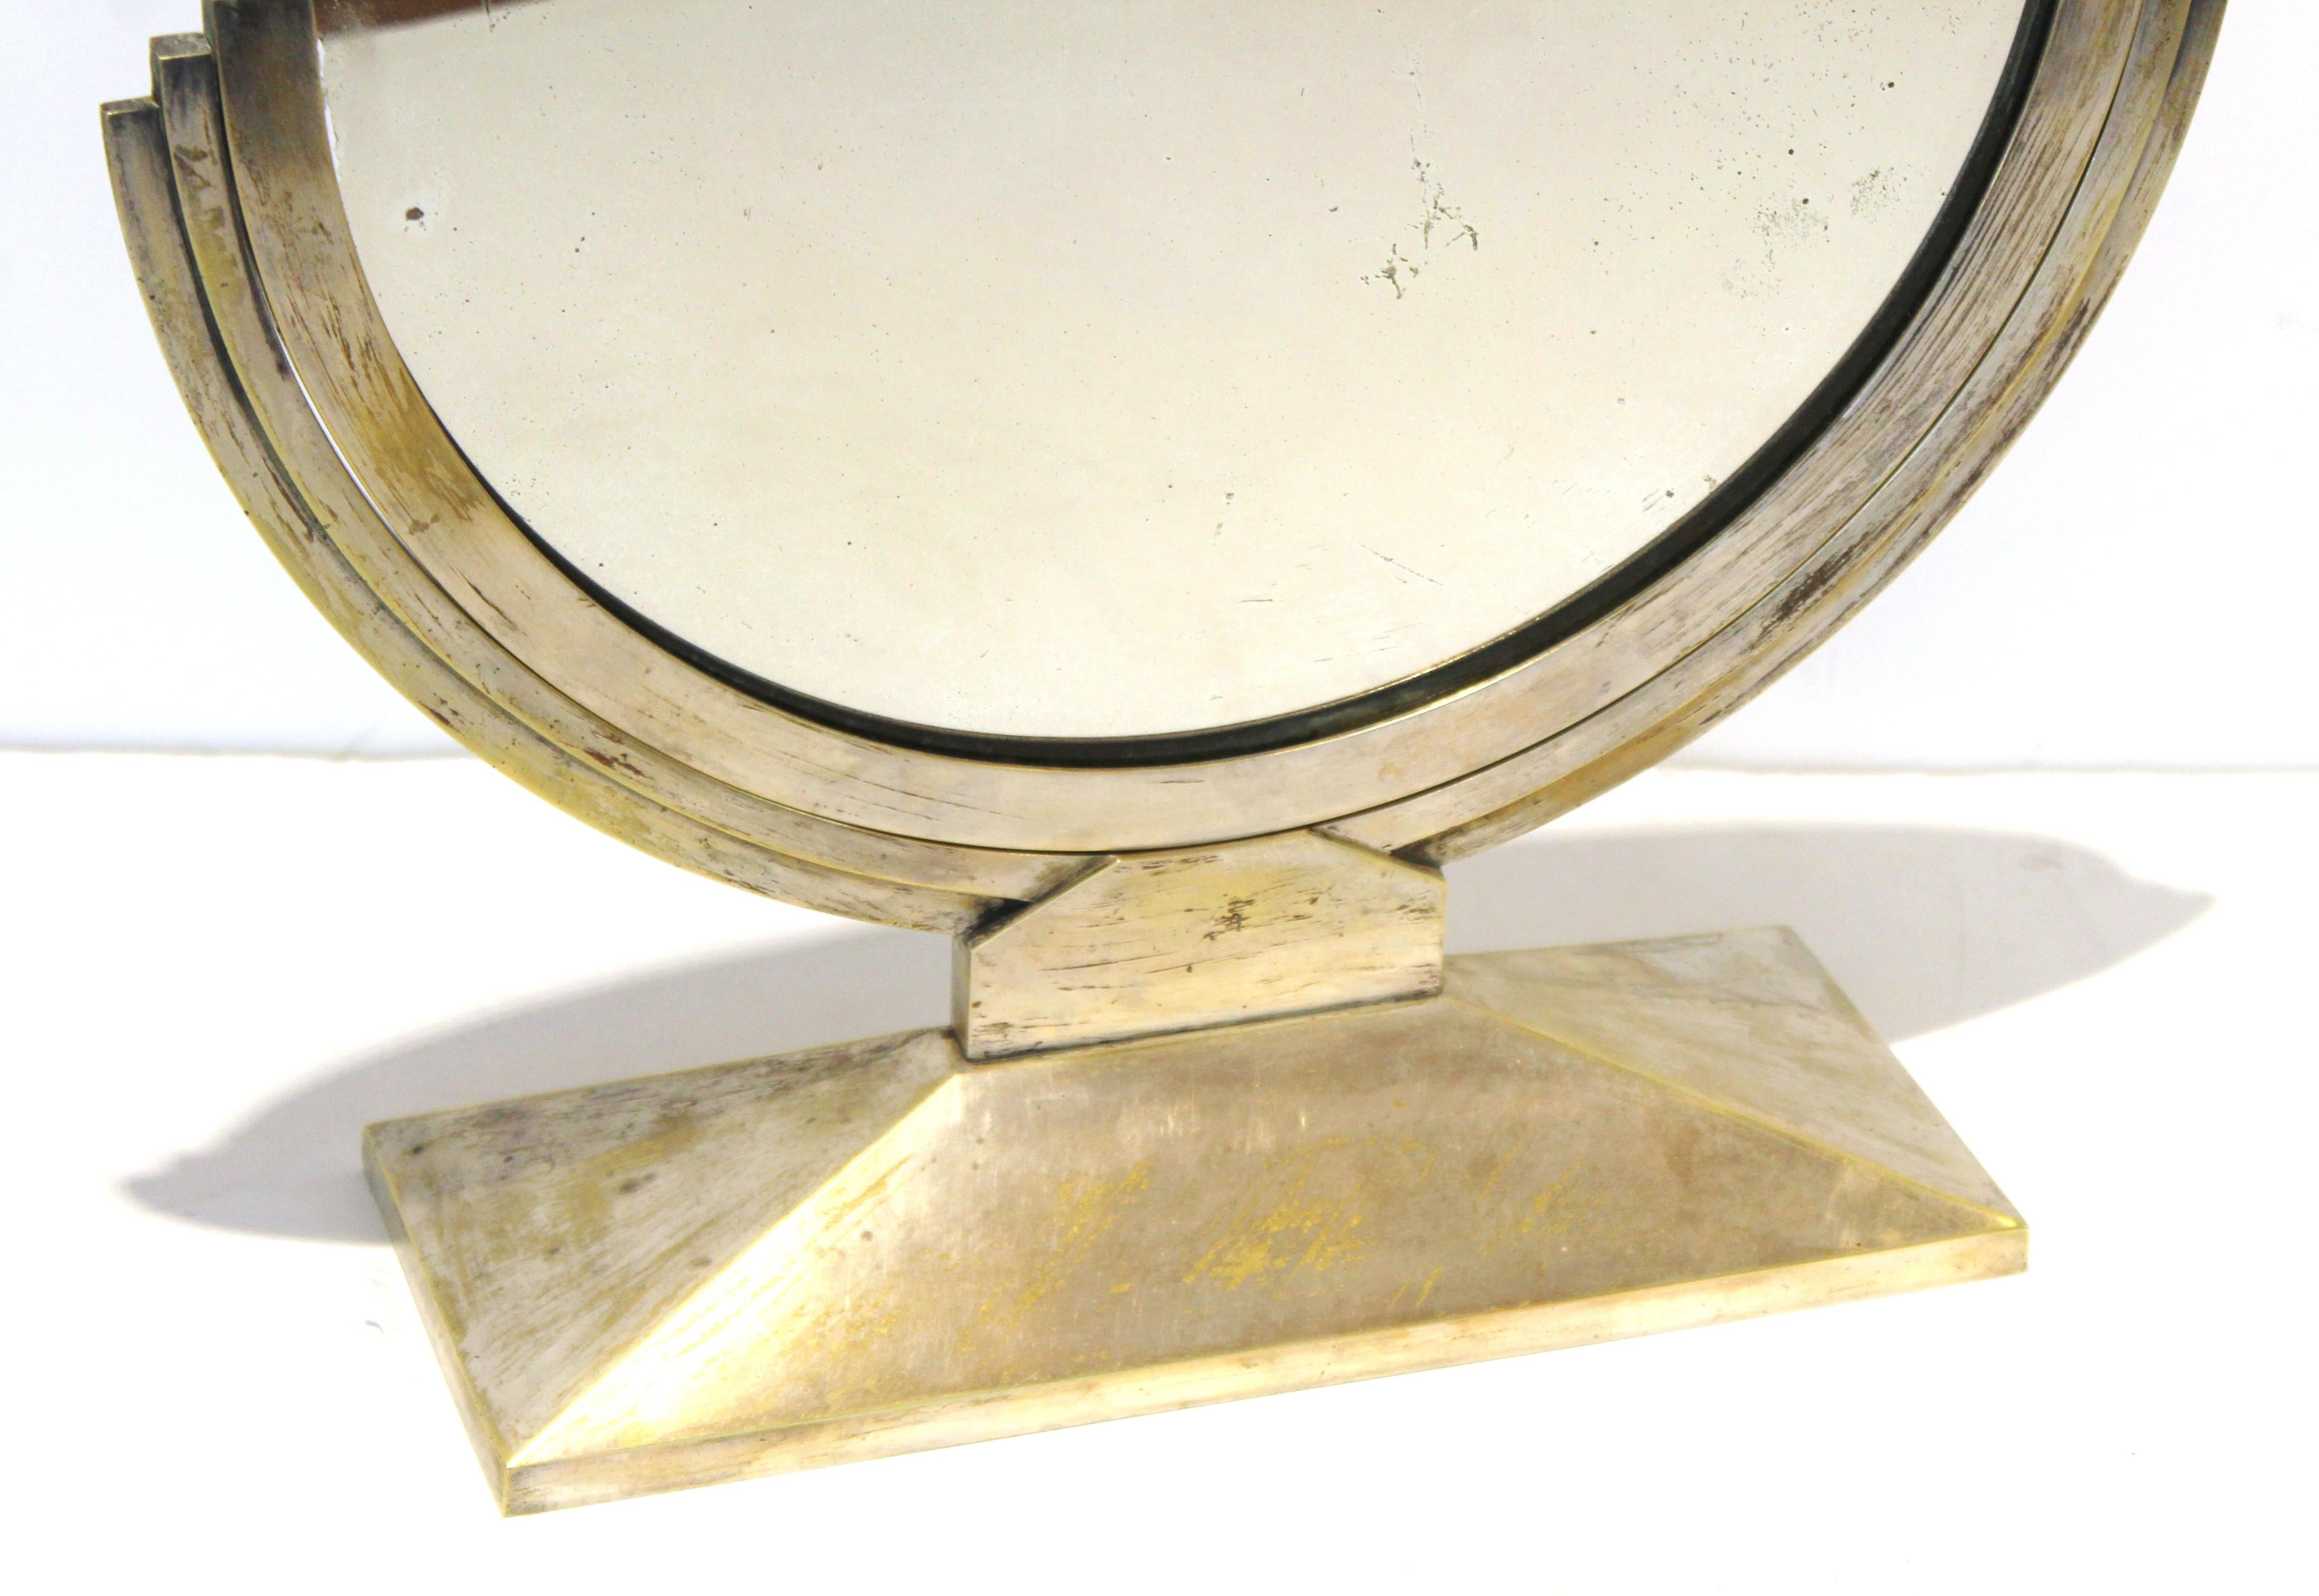 French Art Deco round tabletop mirror or vanity mirror attributed to Maison Desny. The piece has silvered nickel over a bronze structure and pivots. The modernist design gives it a sleek minimal aura. Made in France in the 1920s-1930s, the piece is